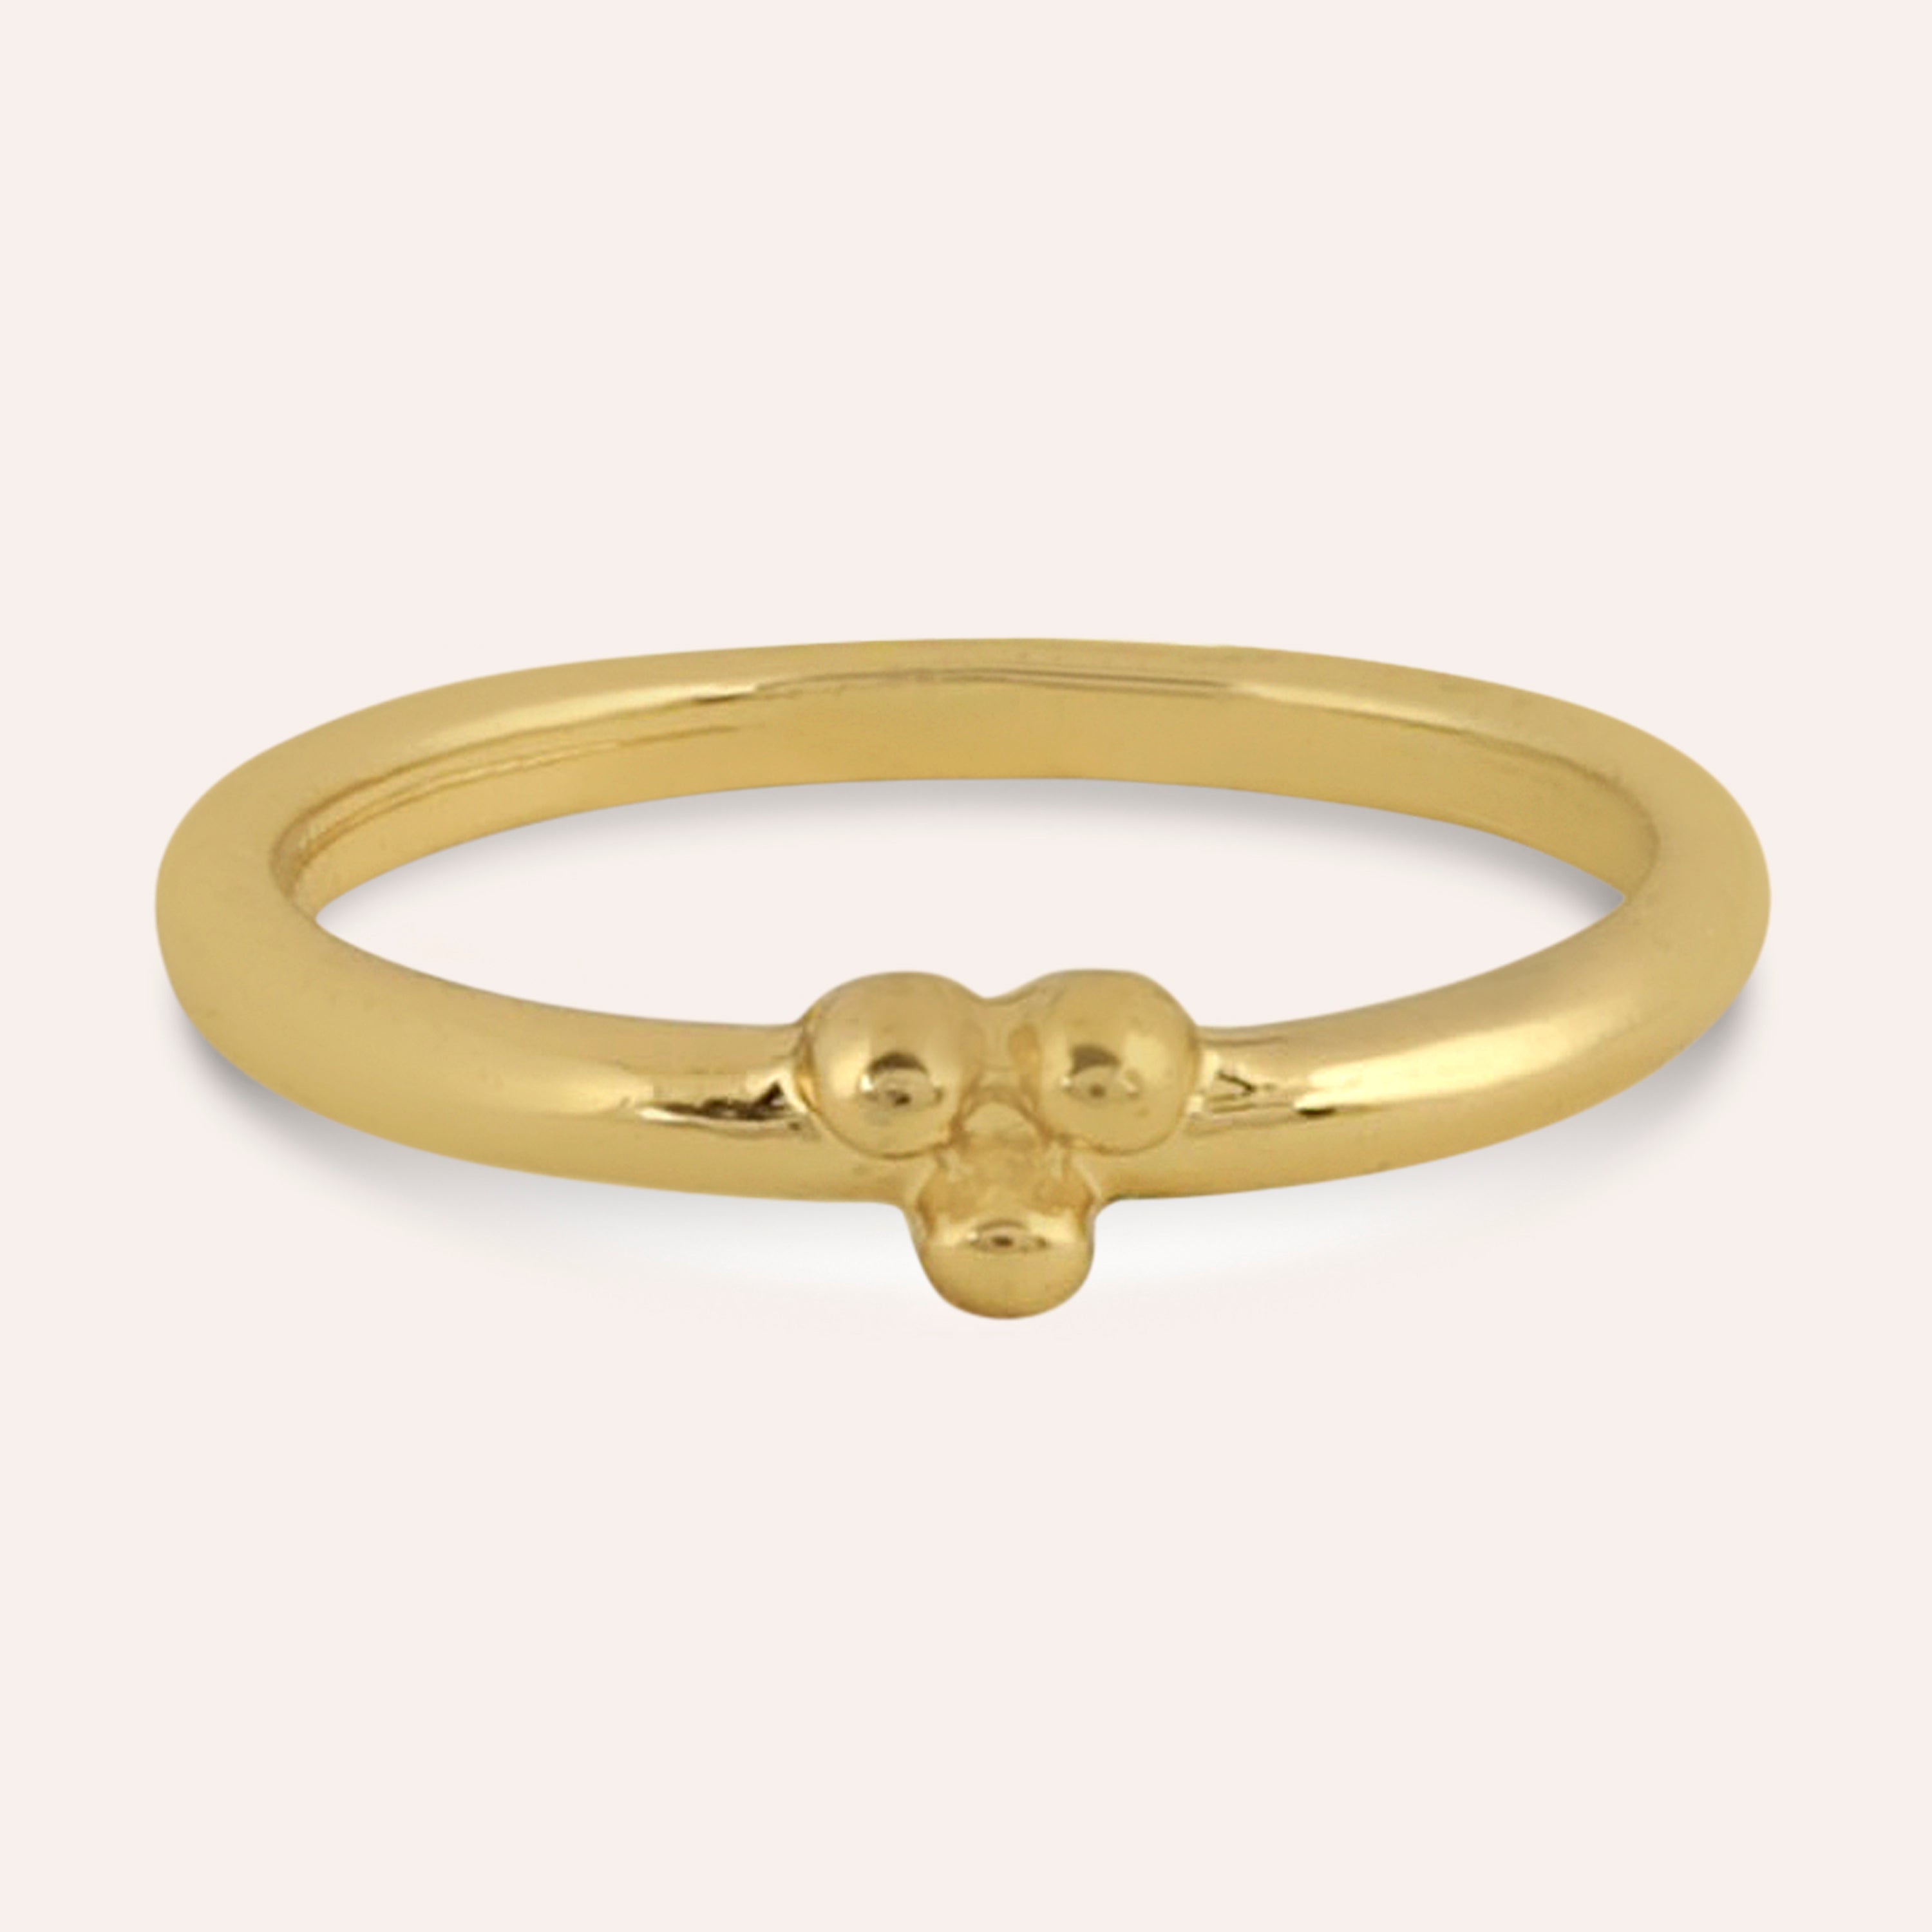 TFC Lovely Lattice Gold Plated Ring Stack-Elevate your style with our exquisite collection of gold-plated adjustable rings for women, including timeless signet rings. Explore cheapest fashion jewellery designs with anti-tarnish properties, all at The Fun Company with a touch of elegance